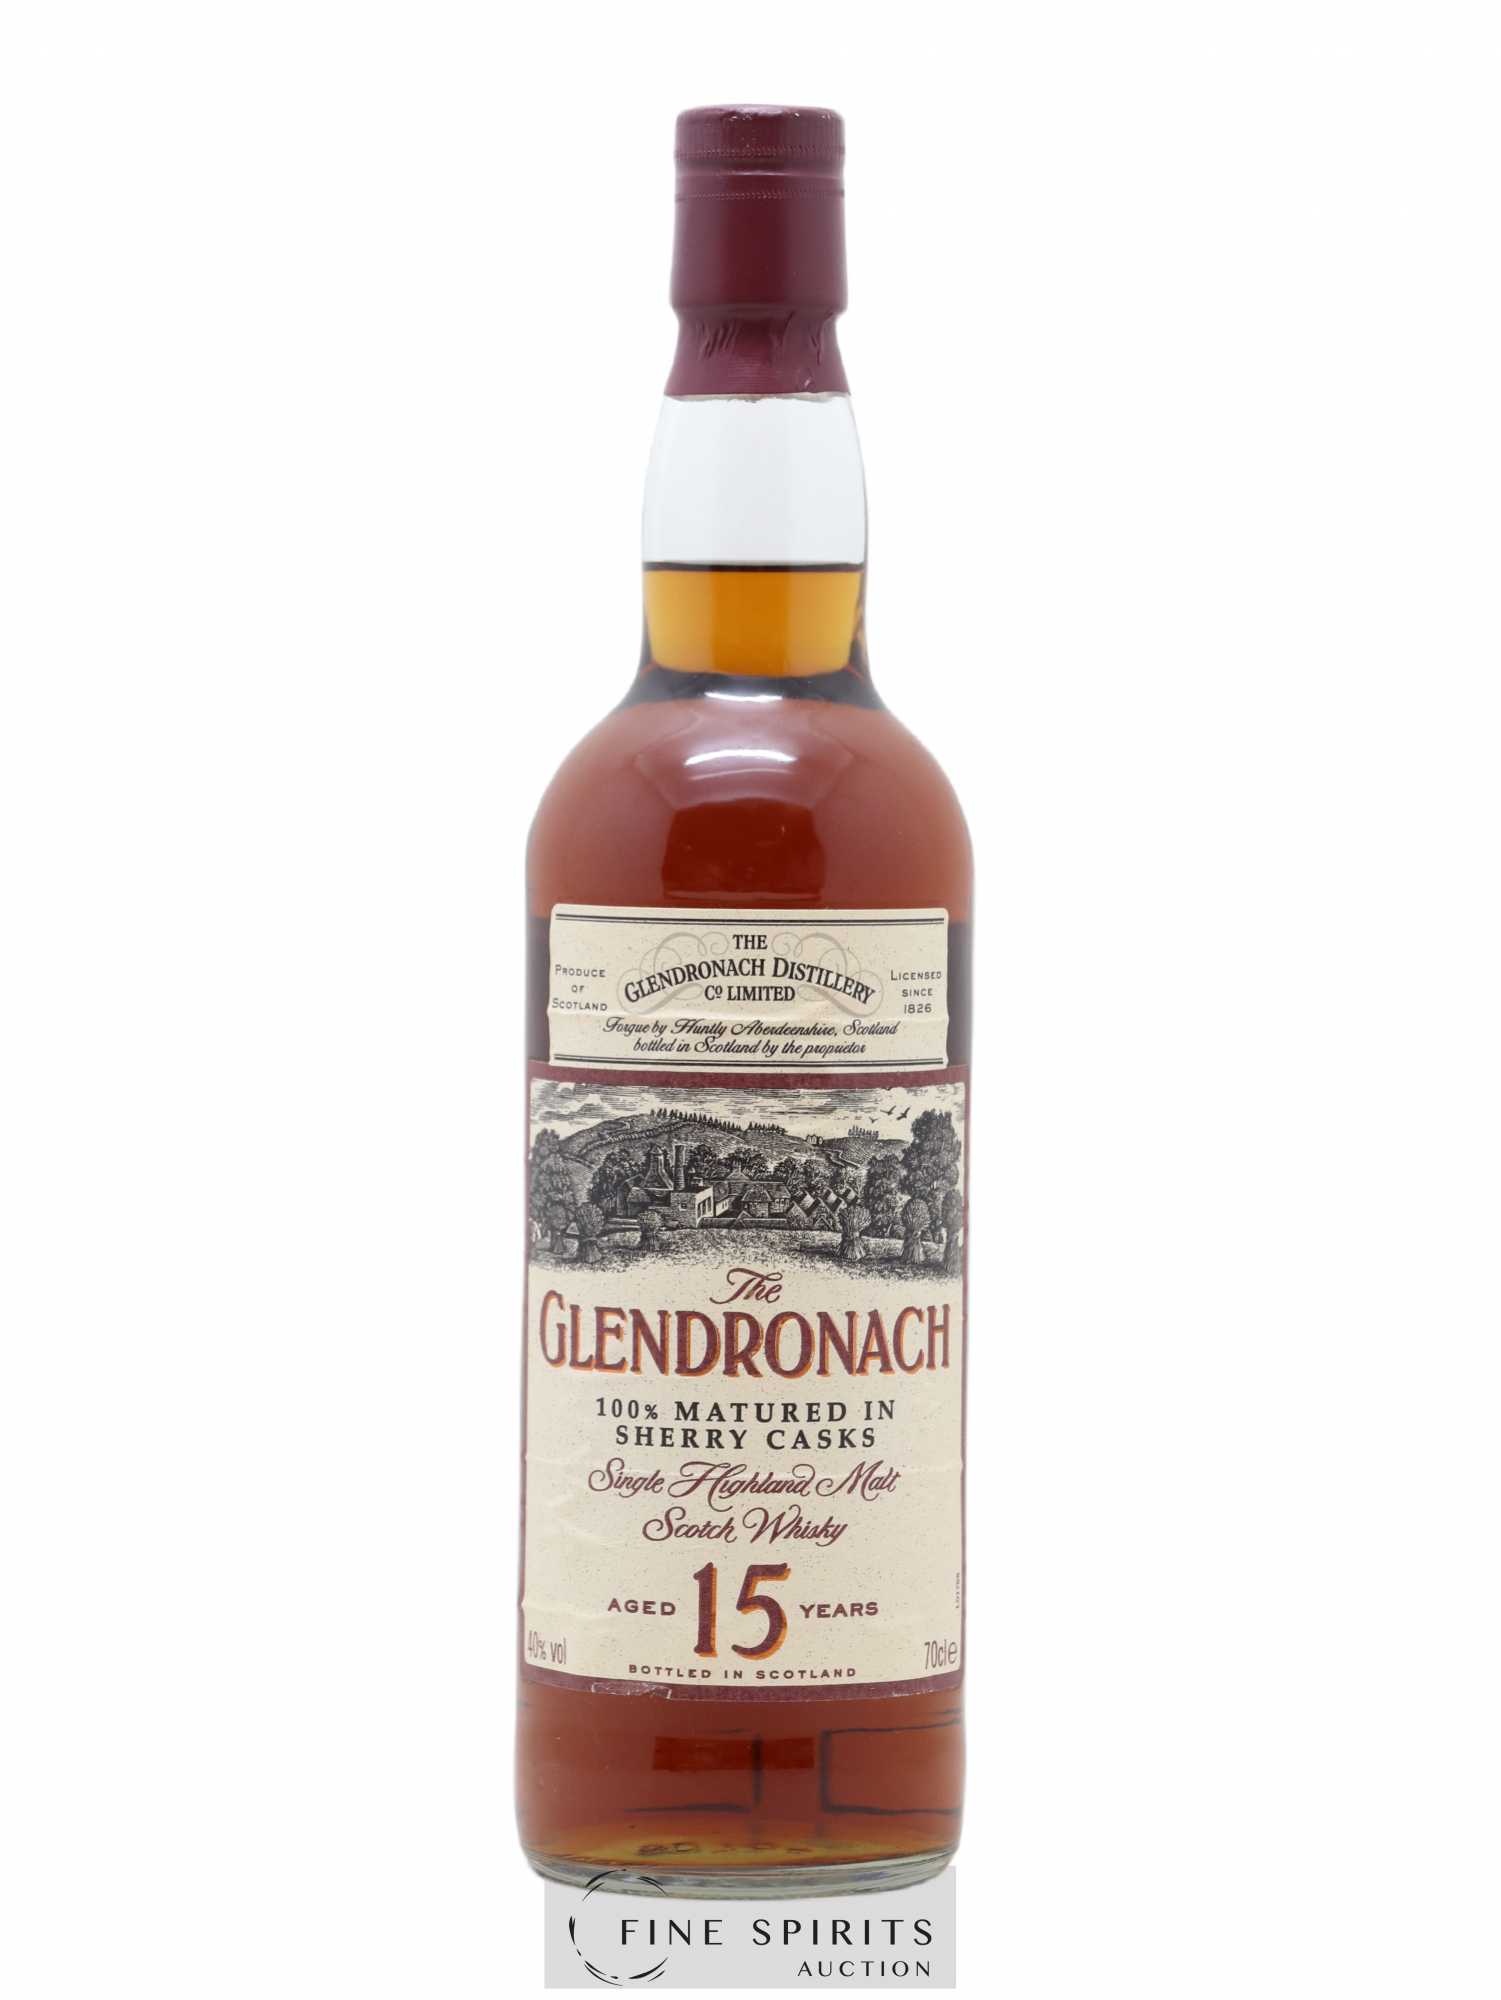 Glendronach 15 years Of. 100% Matured In Sherry Casks